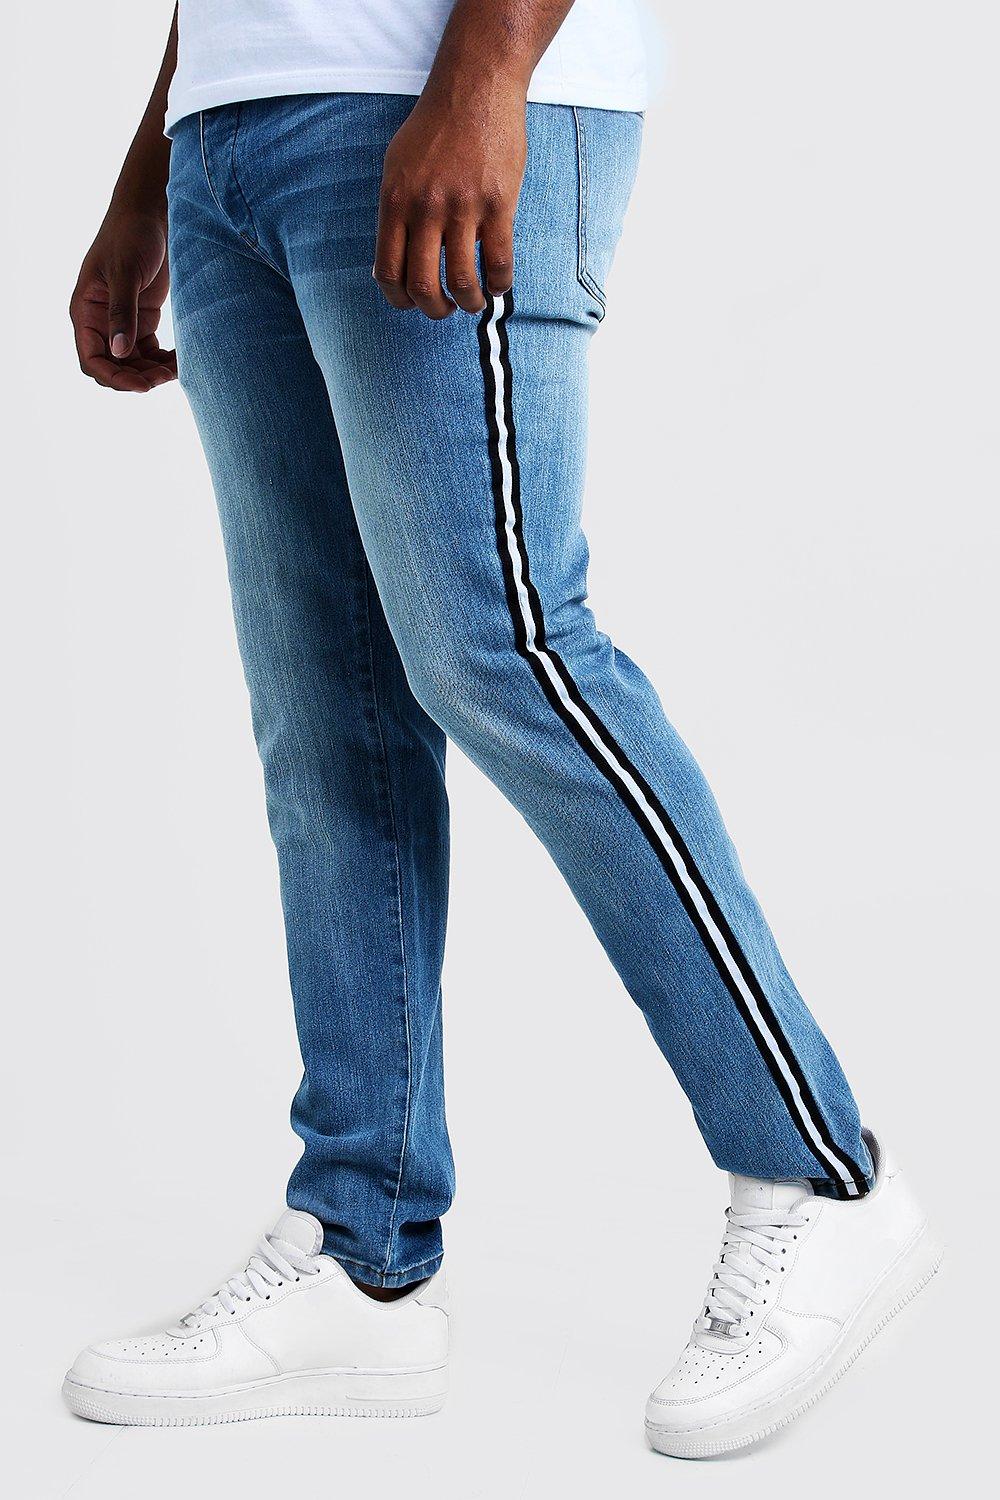 big and tall jeans uk